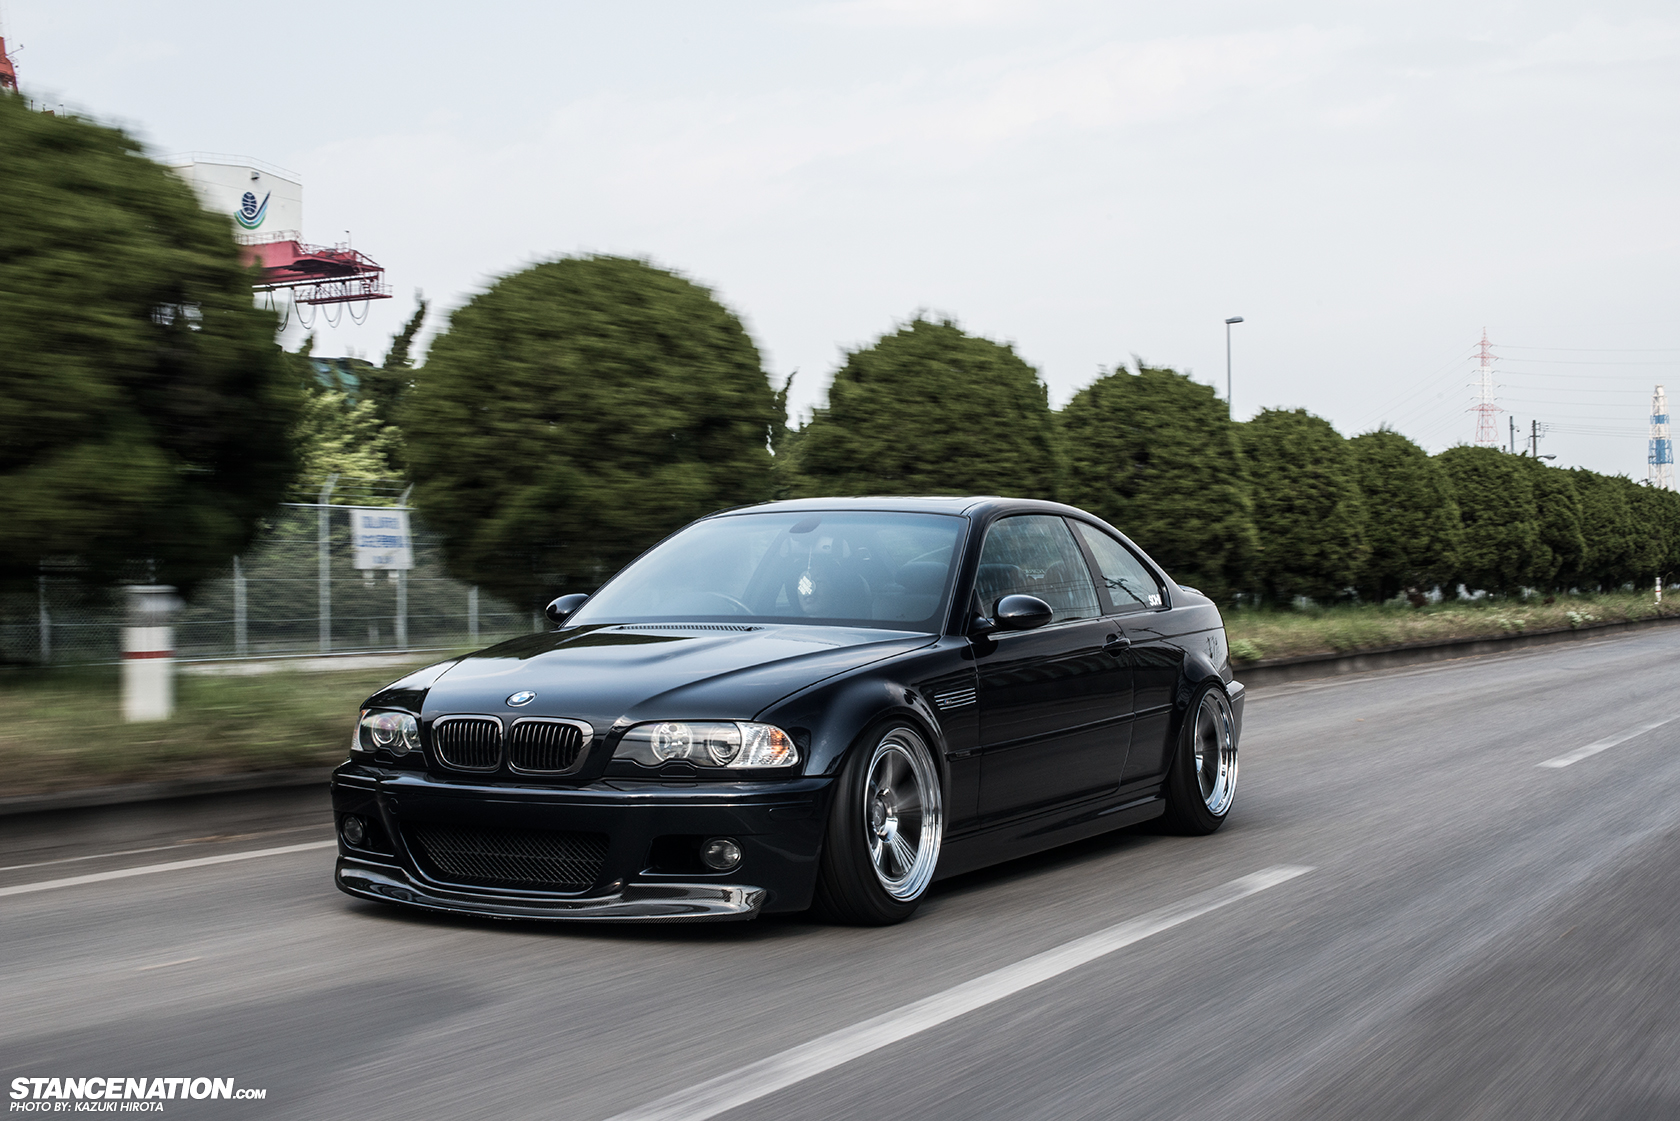 E46 M3, that I saw in Japan : r/Stance